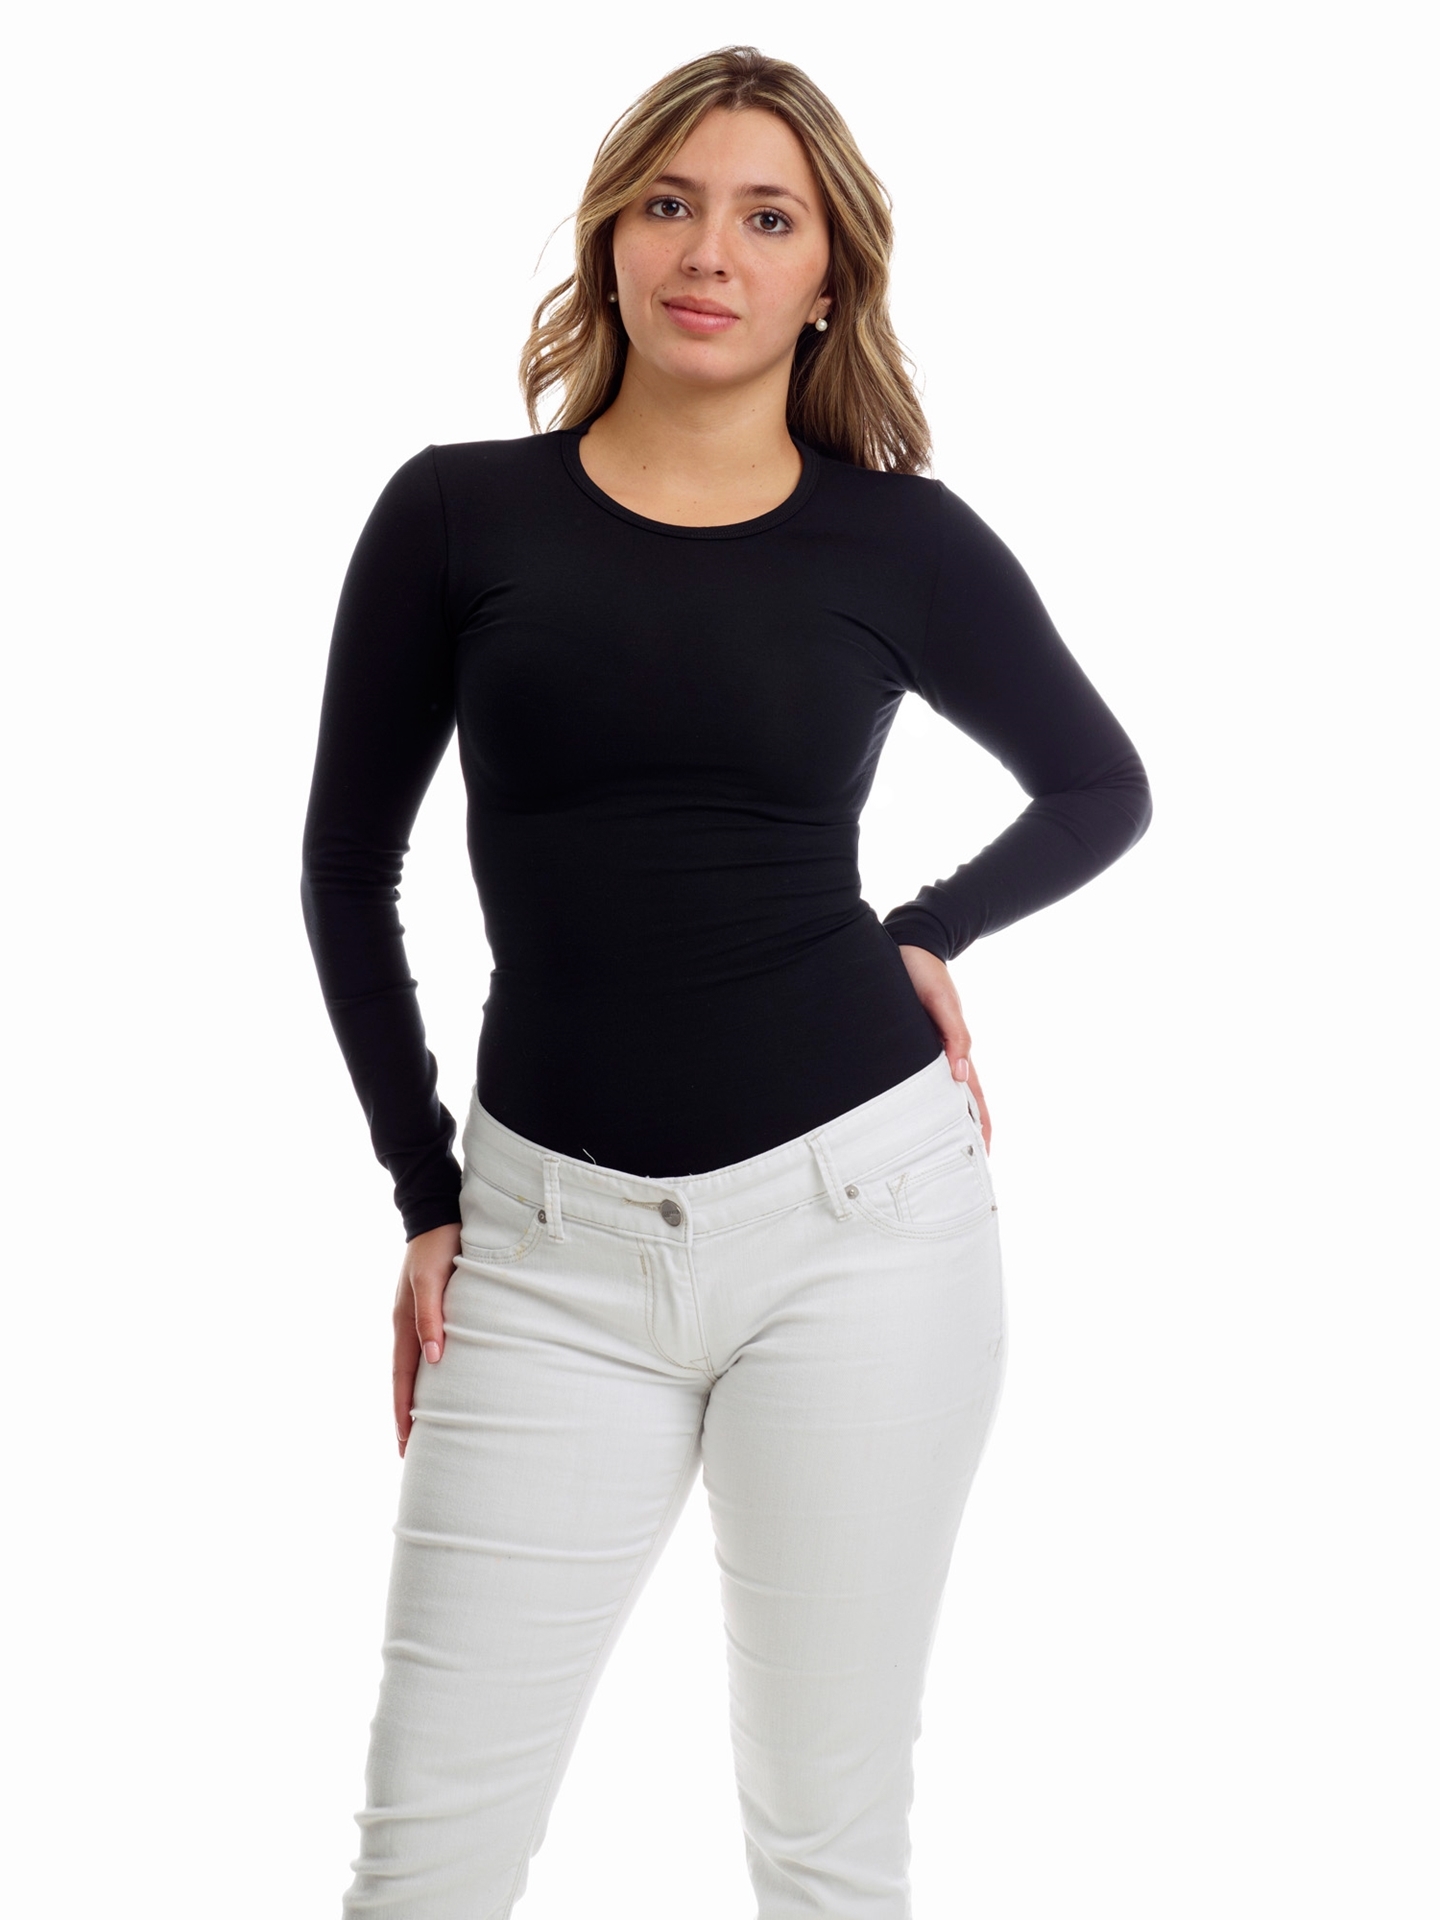 Underworks Womens Ultra Light Cotton Spandex Compression Crew Neck Top Long  Sleeves - Black - XS